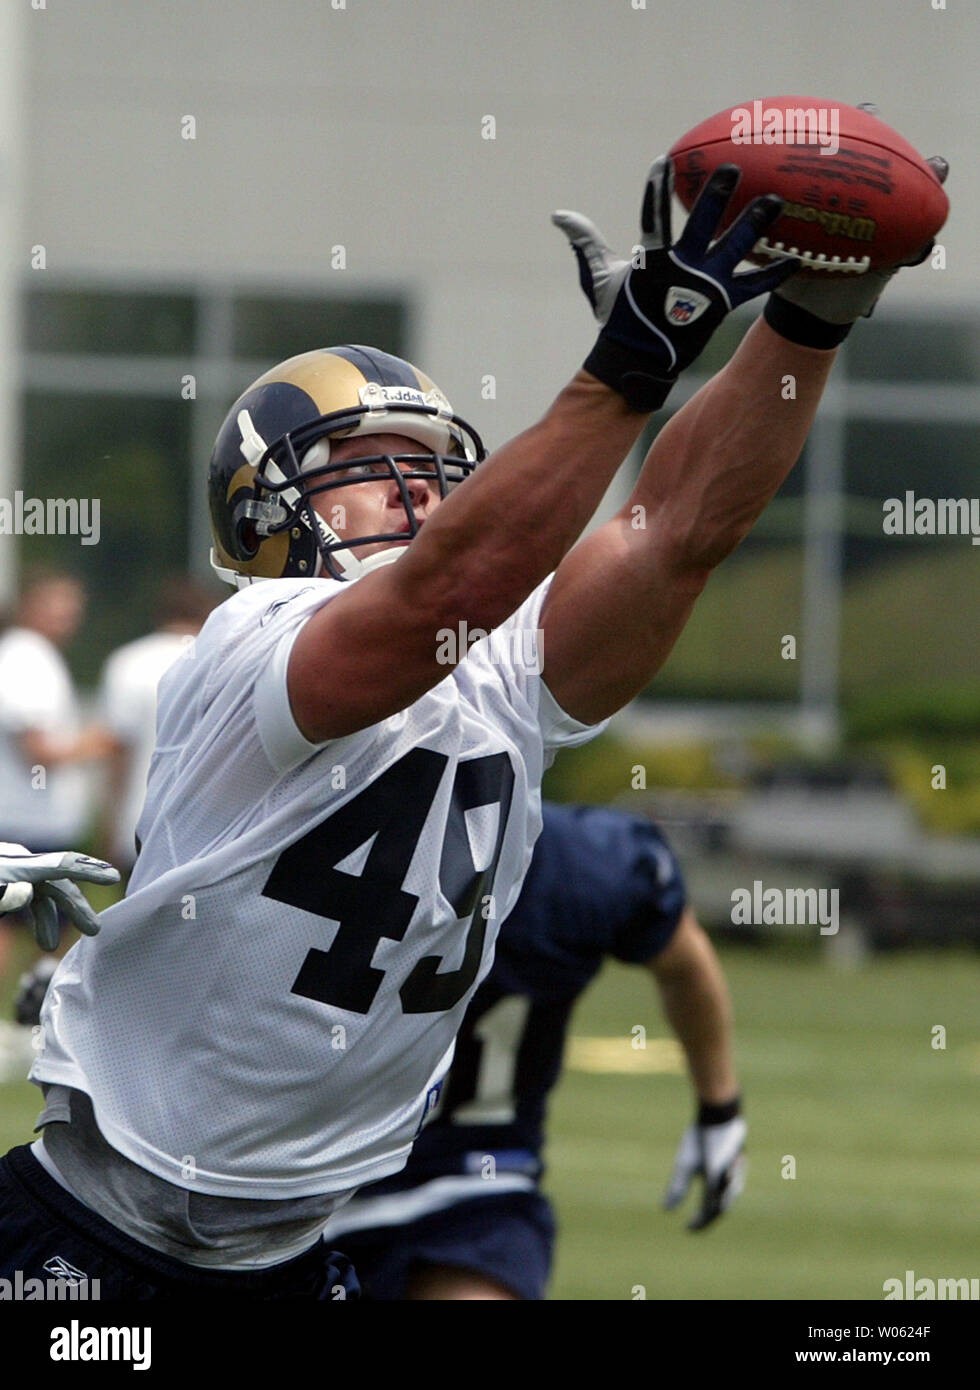 St. Louis Rams tight end Erik Jensen catches a football on his fingertips during the first day of mandatory mini camp at the team practice facility in Earth City, MO on June 3, 2005. (UPI Photo/Bill Greenblatt) Stock Photo